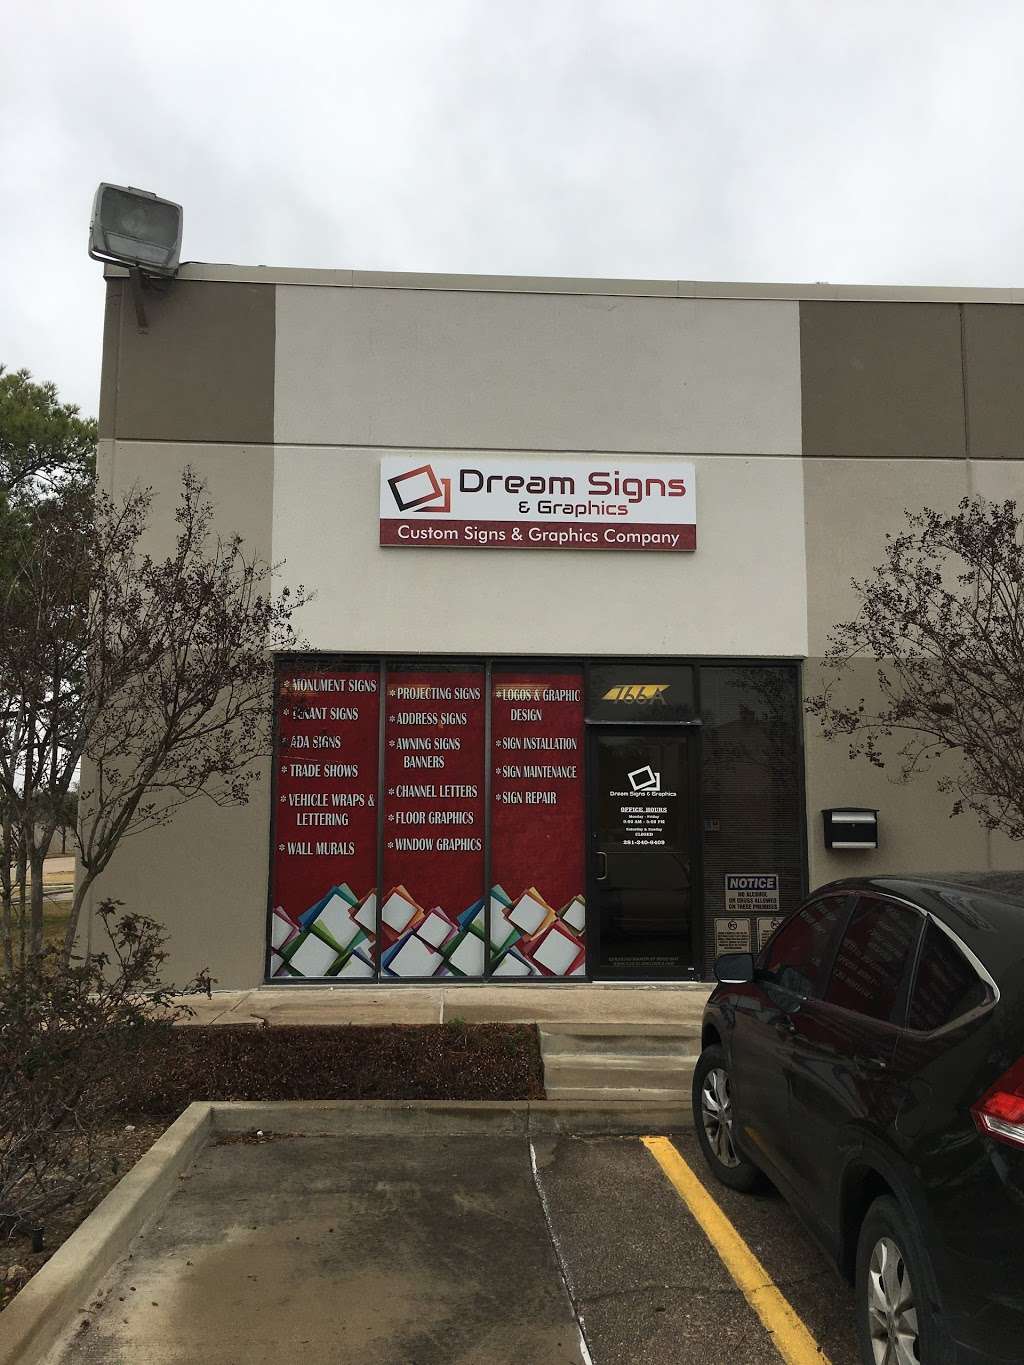 Dream Signs and Graphics - Custom Signs, Business Signs, Vehicle | 766A Industrial Blvd, Sugar Land, TX 77478 | Phone: (281) 612-3949